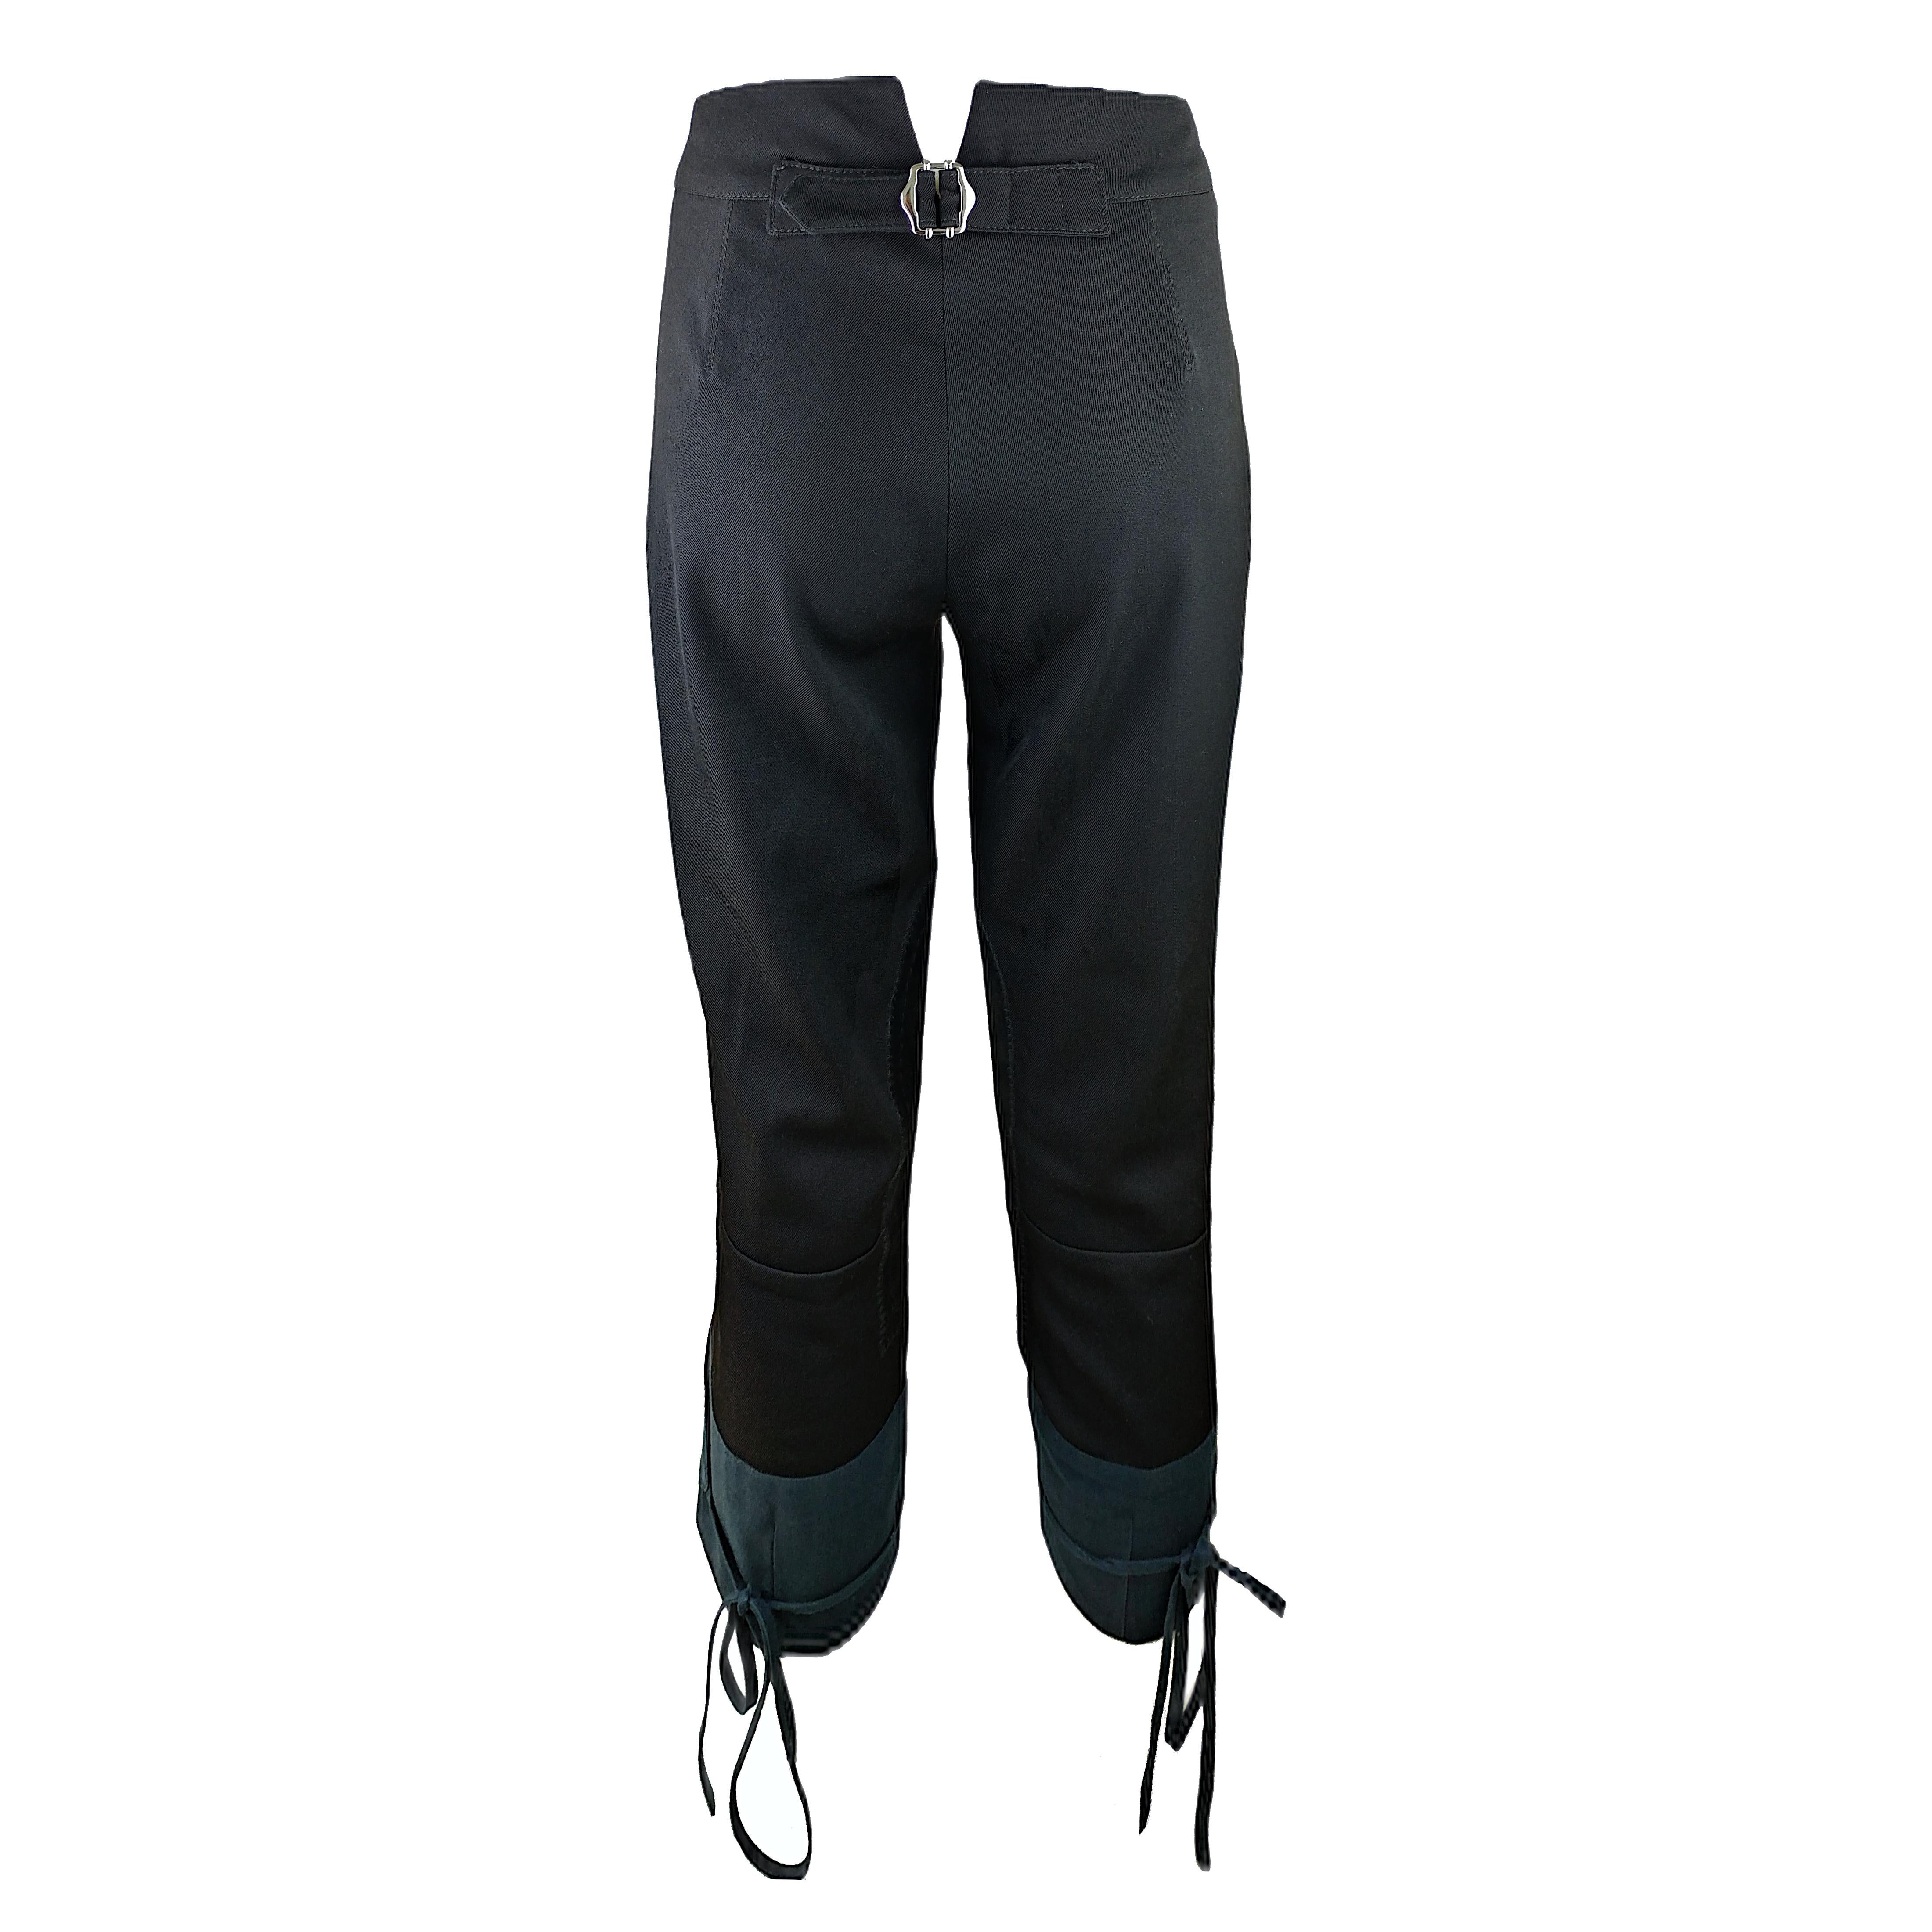 Sportive yet elegant, linear yet sophisticated, these riding pants have more than one reason to please the collector. They feature a hook and zip closure, two small front pockets, a rear buckle and leather applications on the inseam. The bottom hem